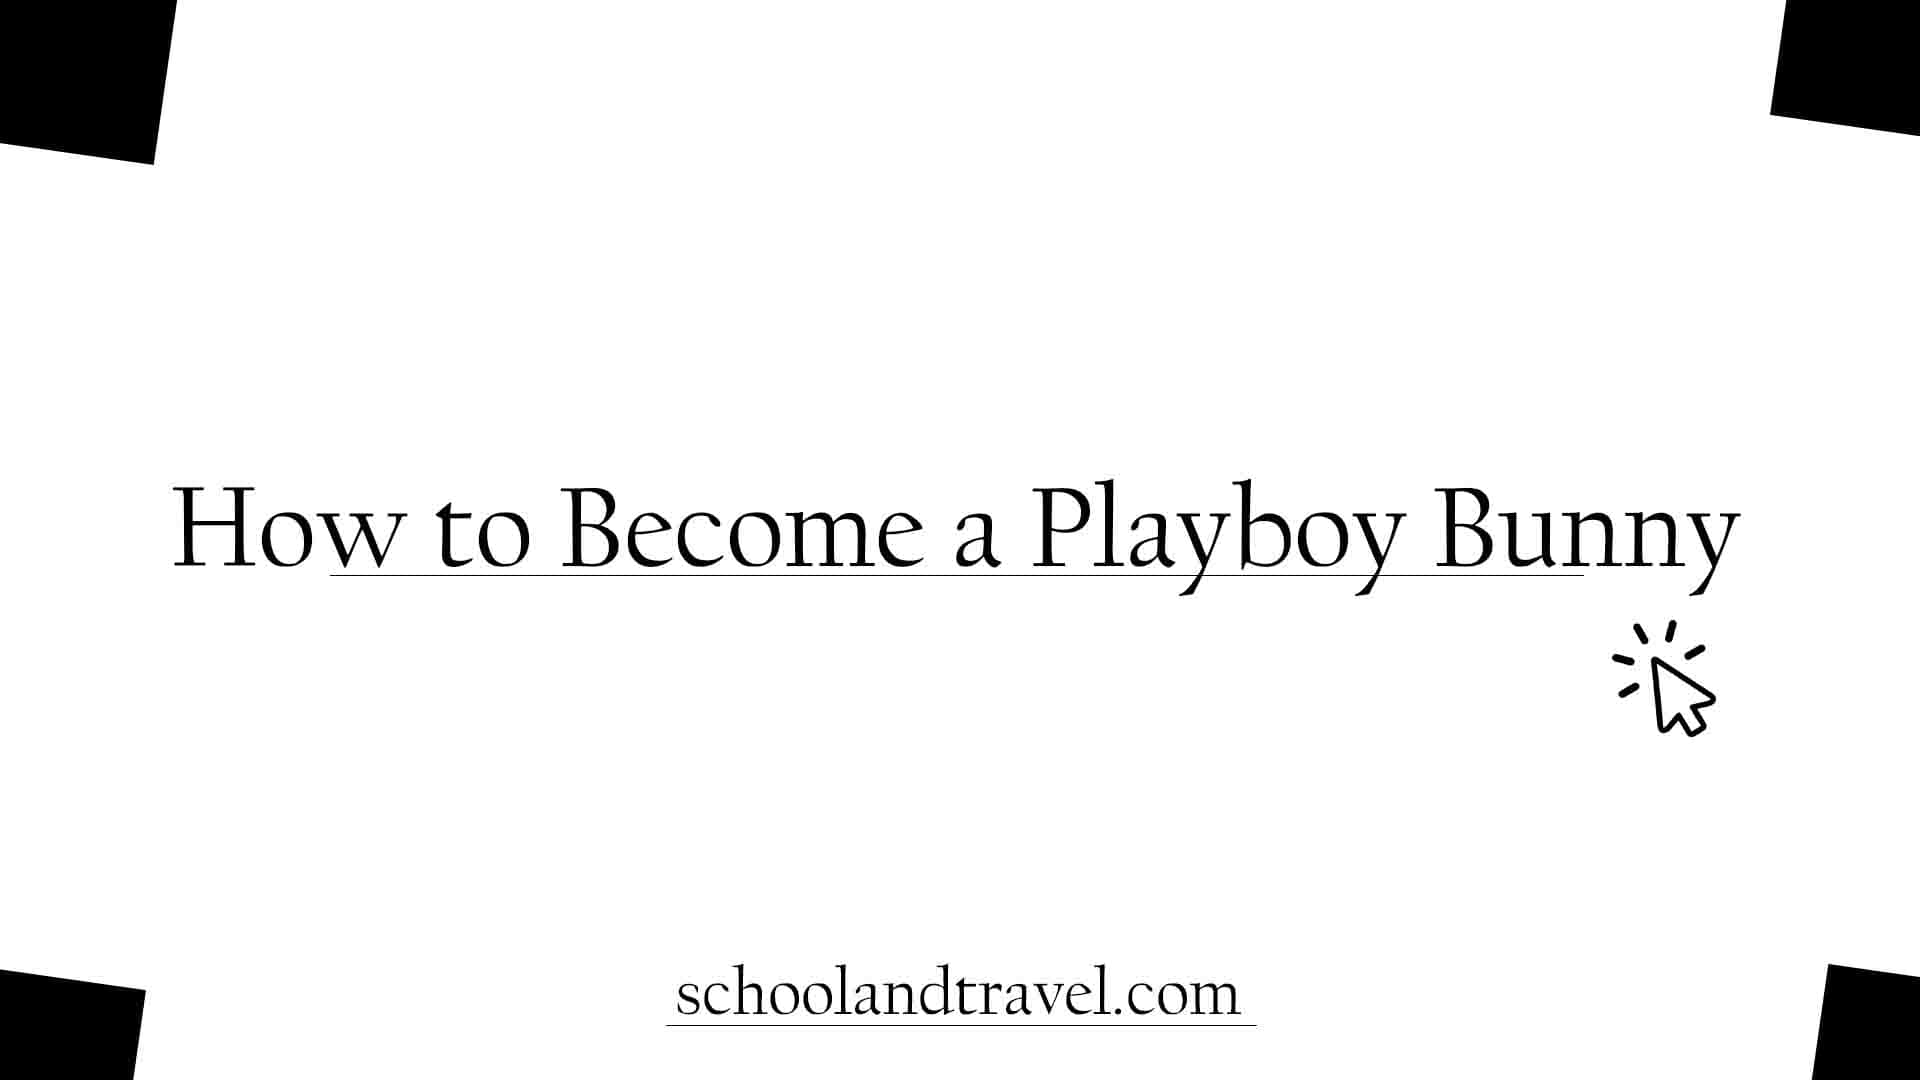 How to become a Playboy Bunny